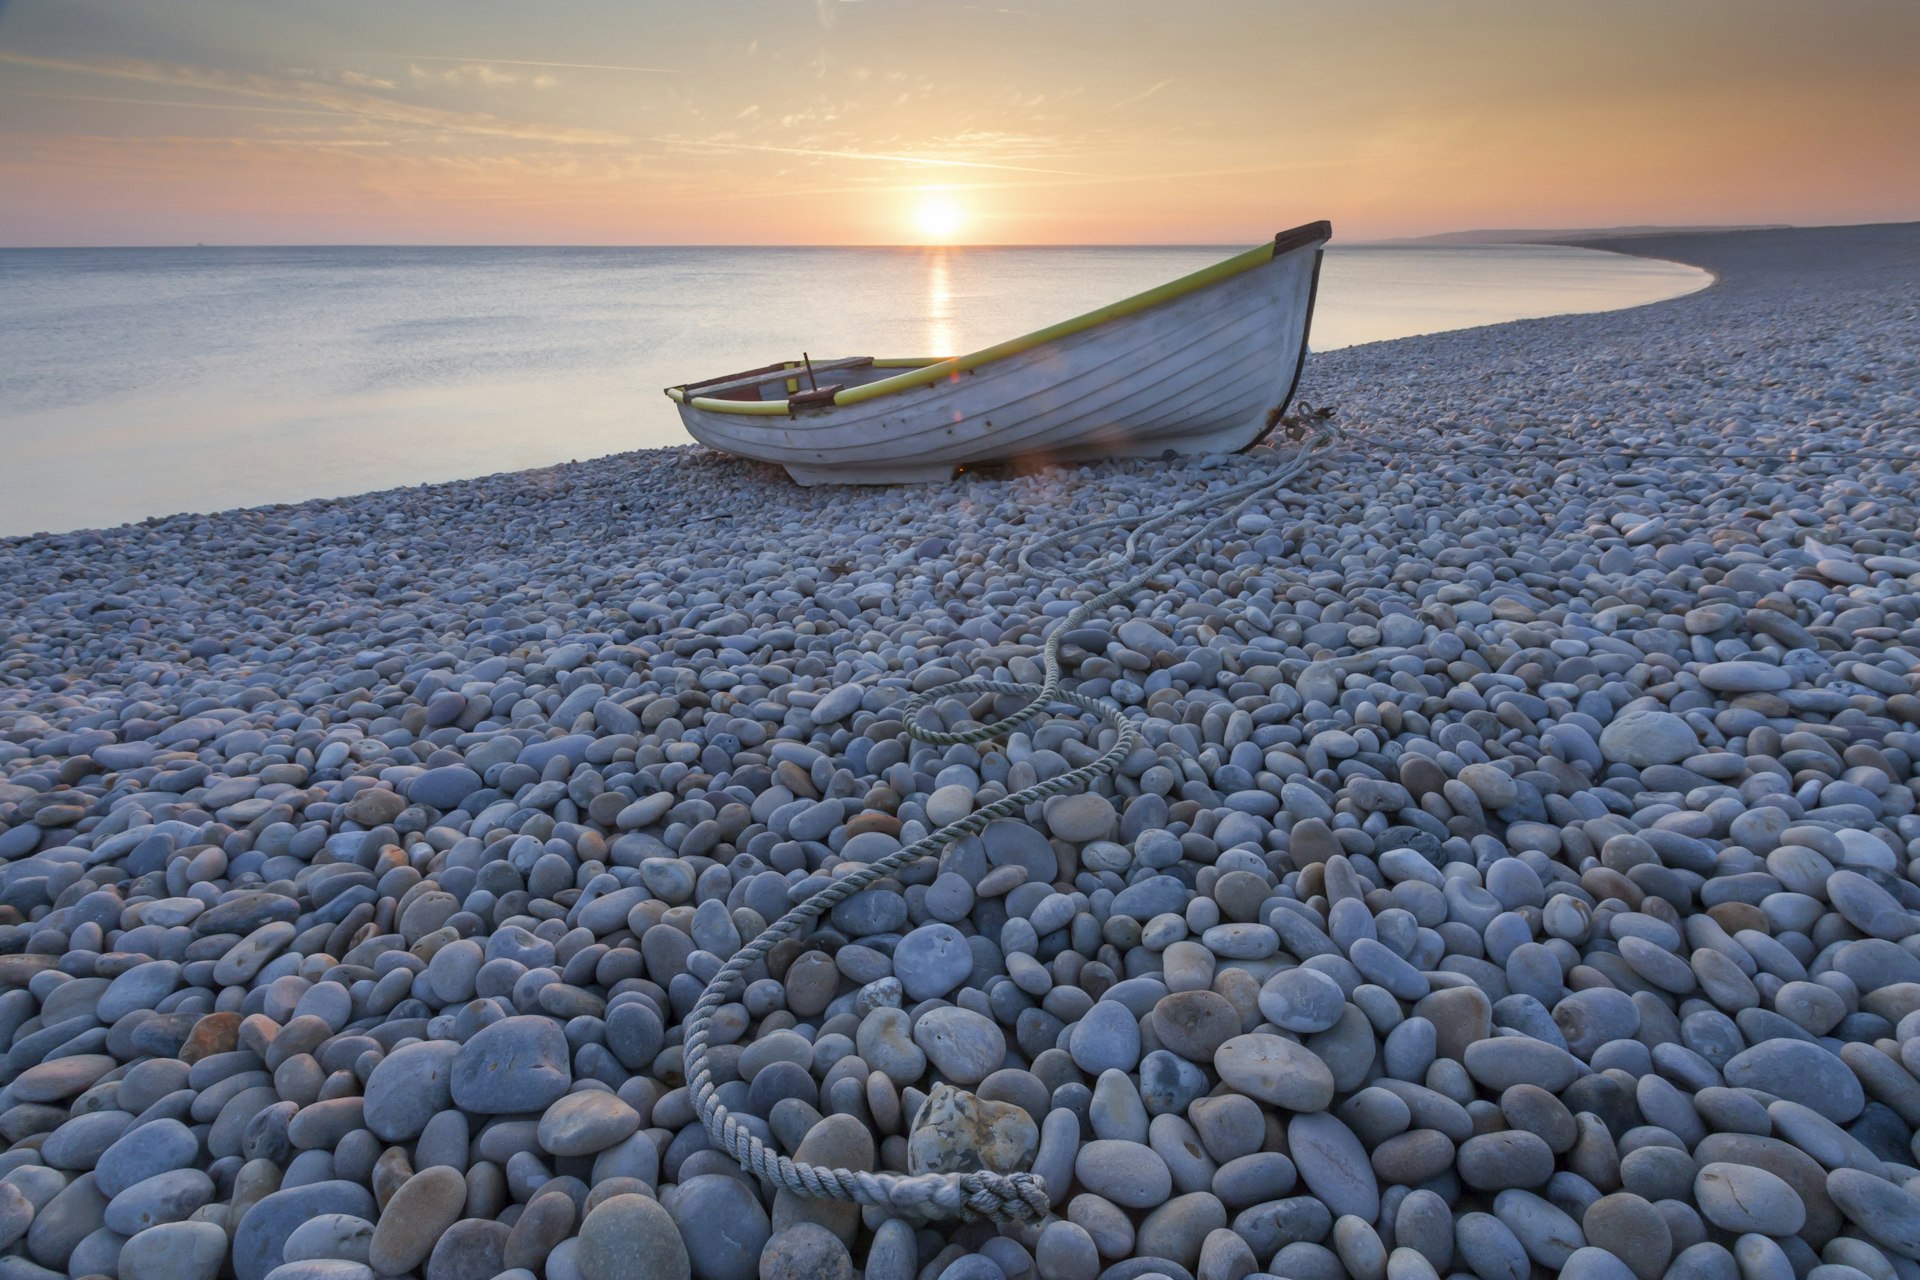 A rowing boat sits on a pebbly beach at sunset. The surface of the sea behind is extremely still and smooth